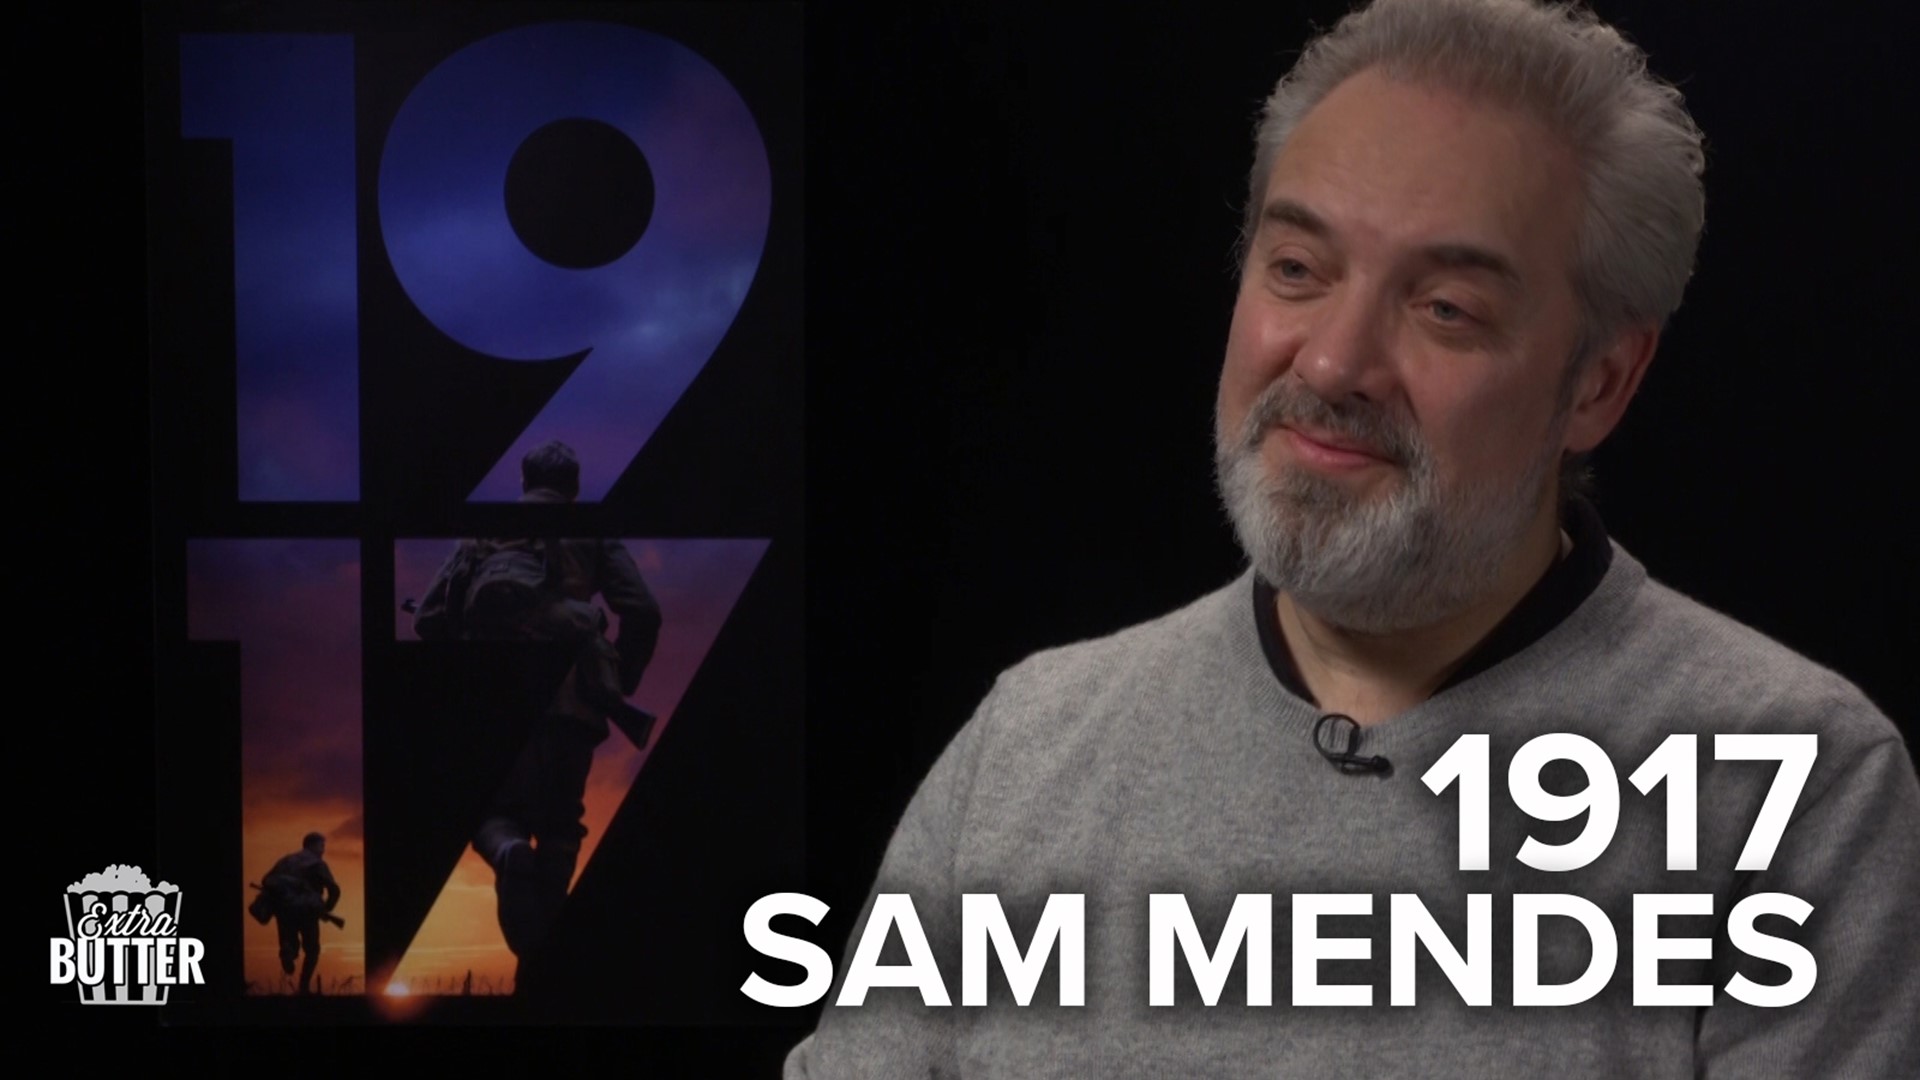 Sam Mendes talks about the story behind his unique war movie '1917.' He also talks about the challenges of making the movie in one continuous take.